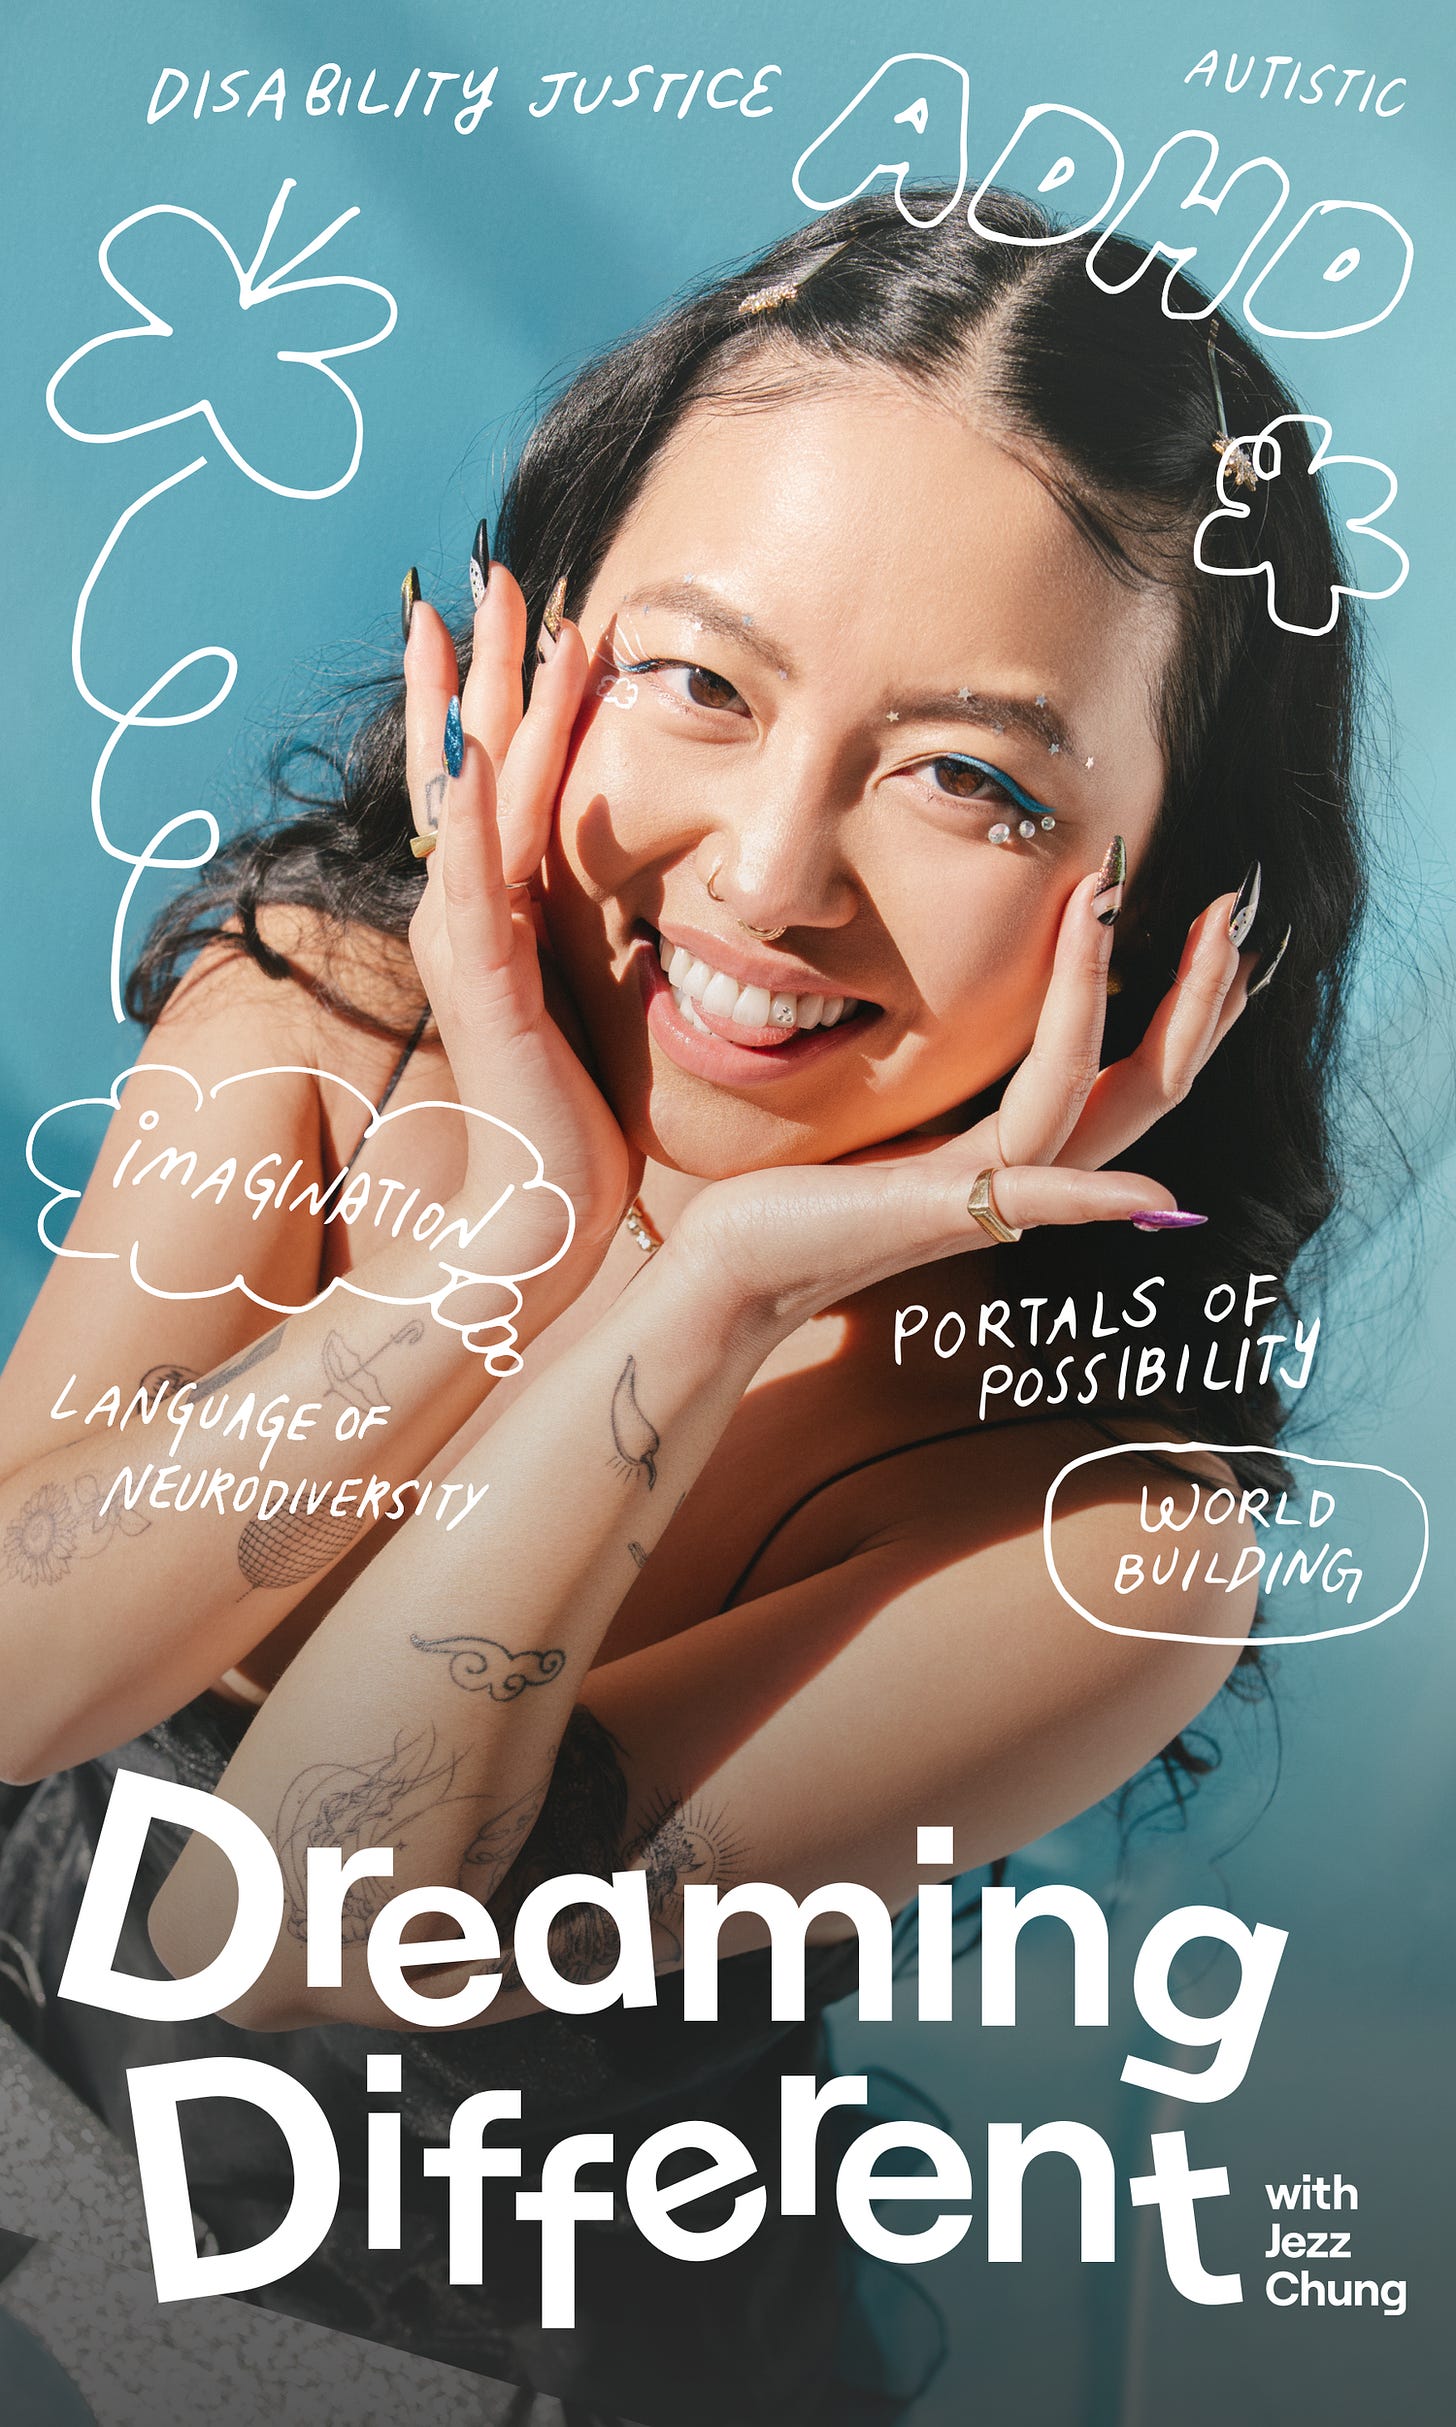 Cover art for the audio series features Jezz Chung, an Asian person with tattoos and long black hair, smiling with their hands framing their face in a playful gesture. At the bottom is bold white text that reads: Dreaming Different with Jezz Chung. Floating around Jezz’s face are topics from the intro episode in handwritten type: language of neurodiversity, imagination, disability justice, ADHD, autistic, portals of possibility, world building.